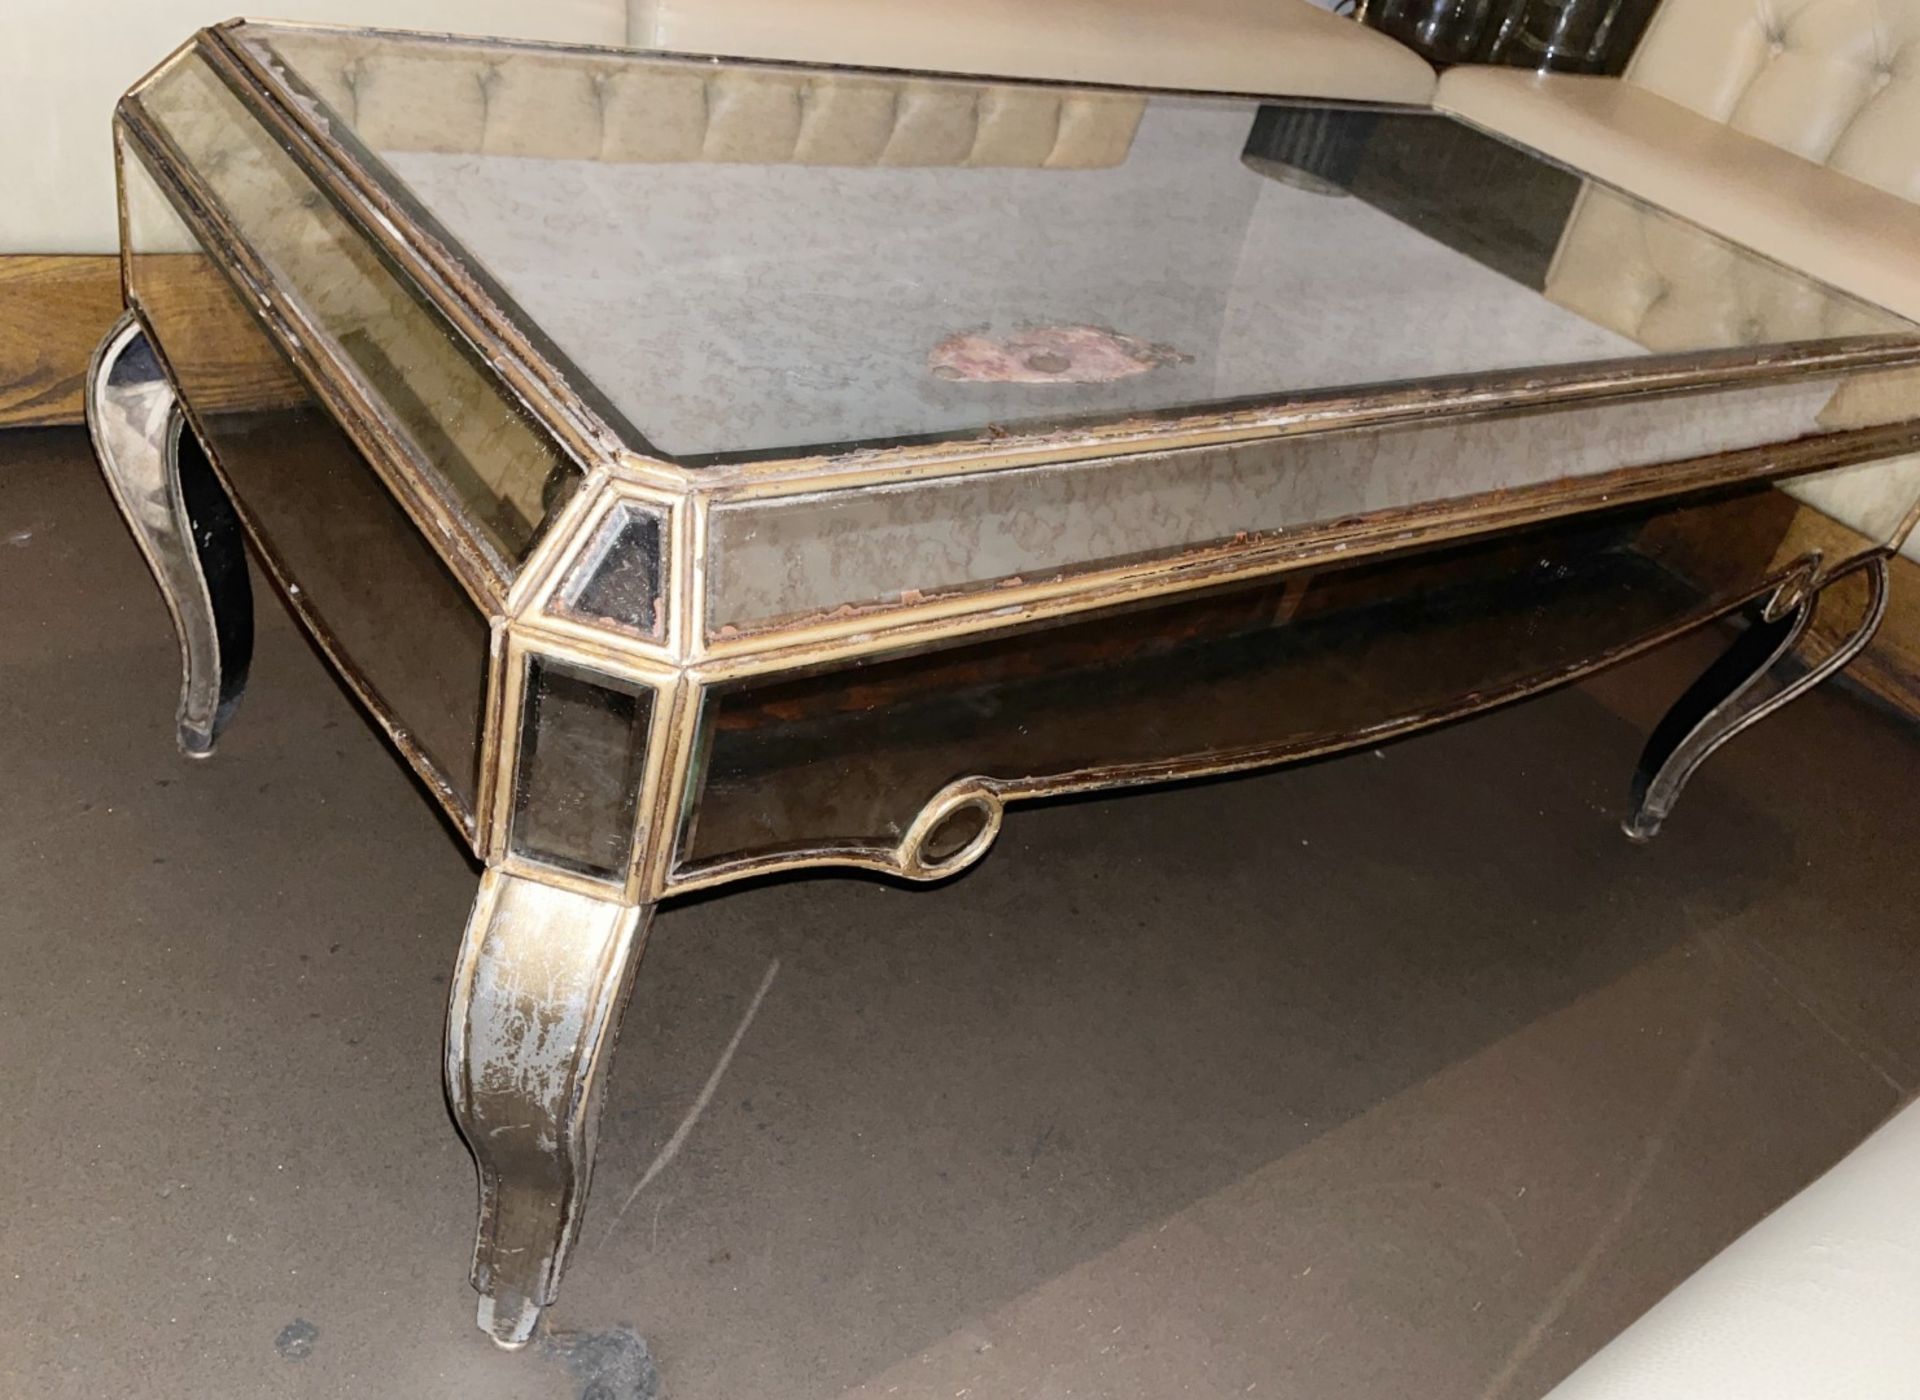 1 x Vintage French-style Mirrored Rectangular Cocktail Coffee Table with an Aged Aesthetic - Image 3 of 4